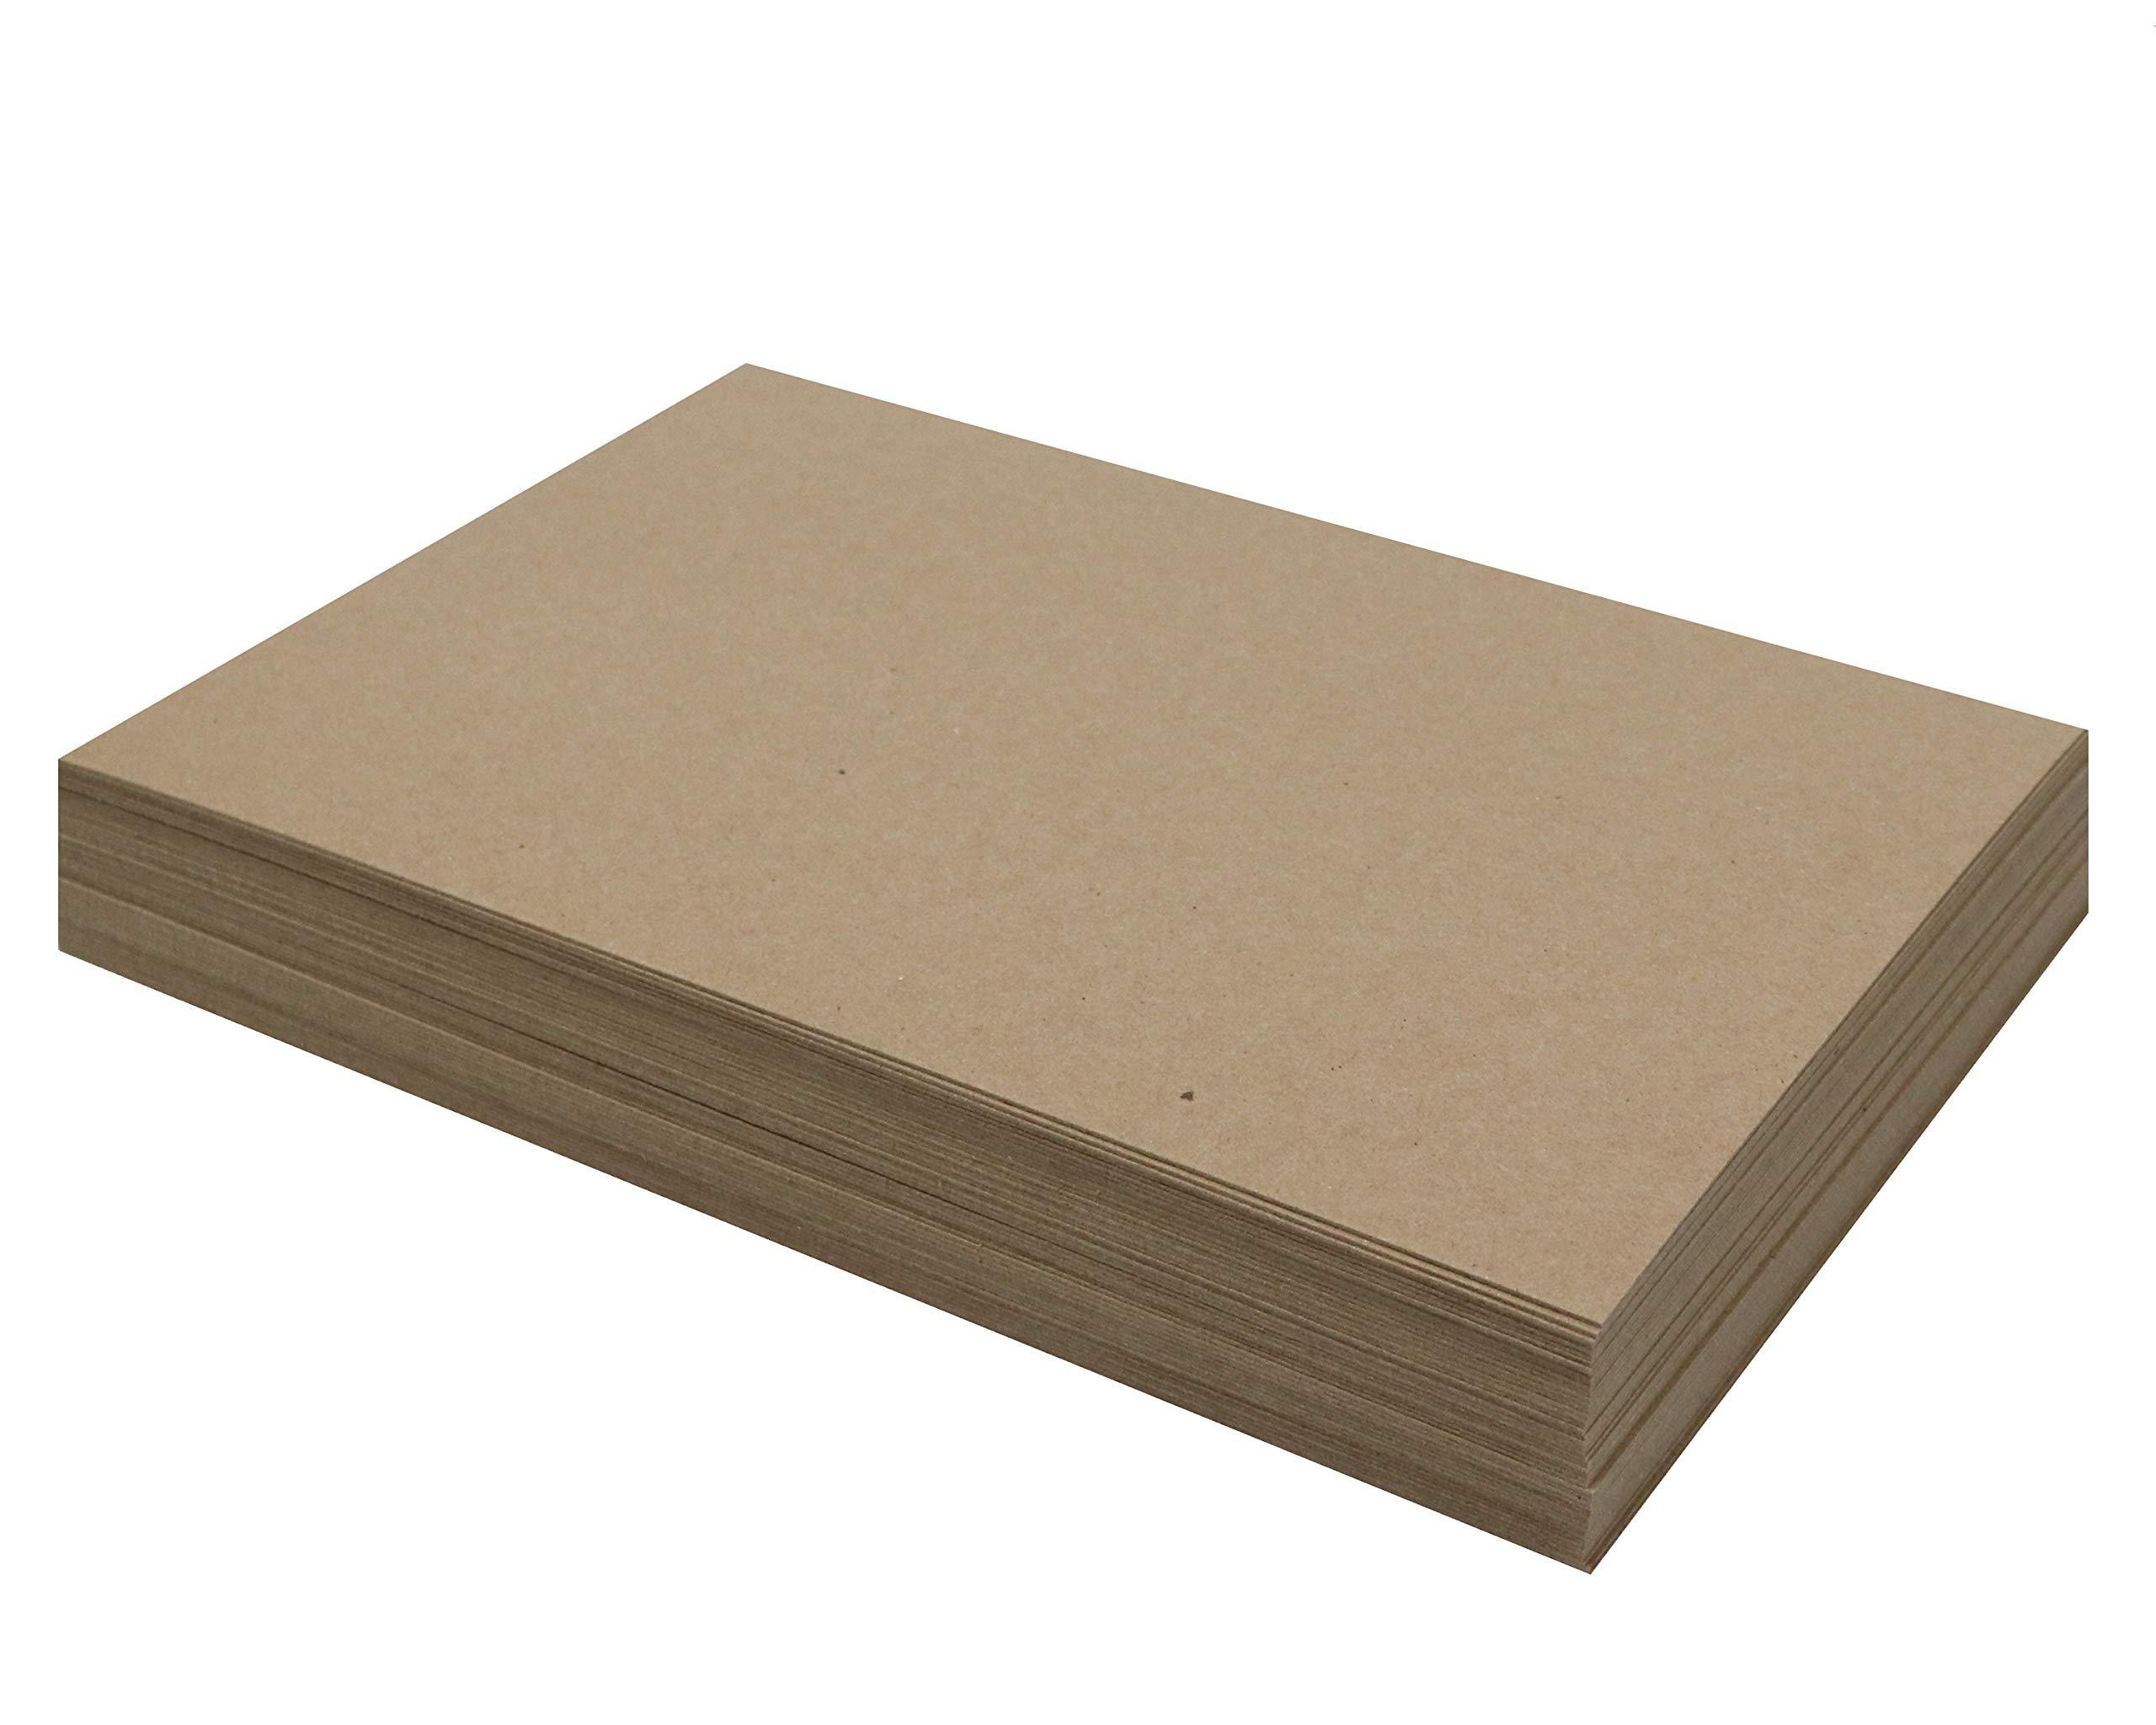 50 Chipboard Sheets 11 x 17 inch - 50pt (Point) Heavy Weight Brown Kraft  Cardboard for Scrapbooking & Picture Frame Backing (.050 Caliper Thick)  Paper Board